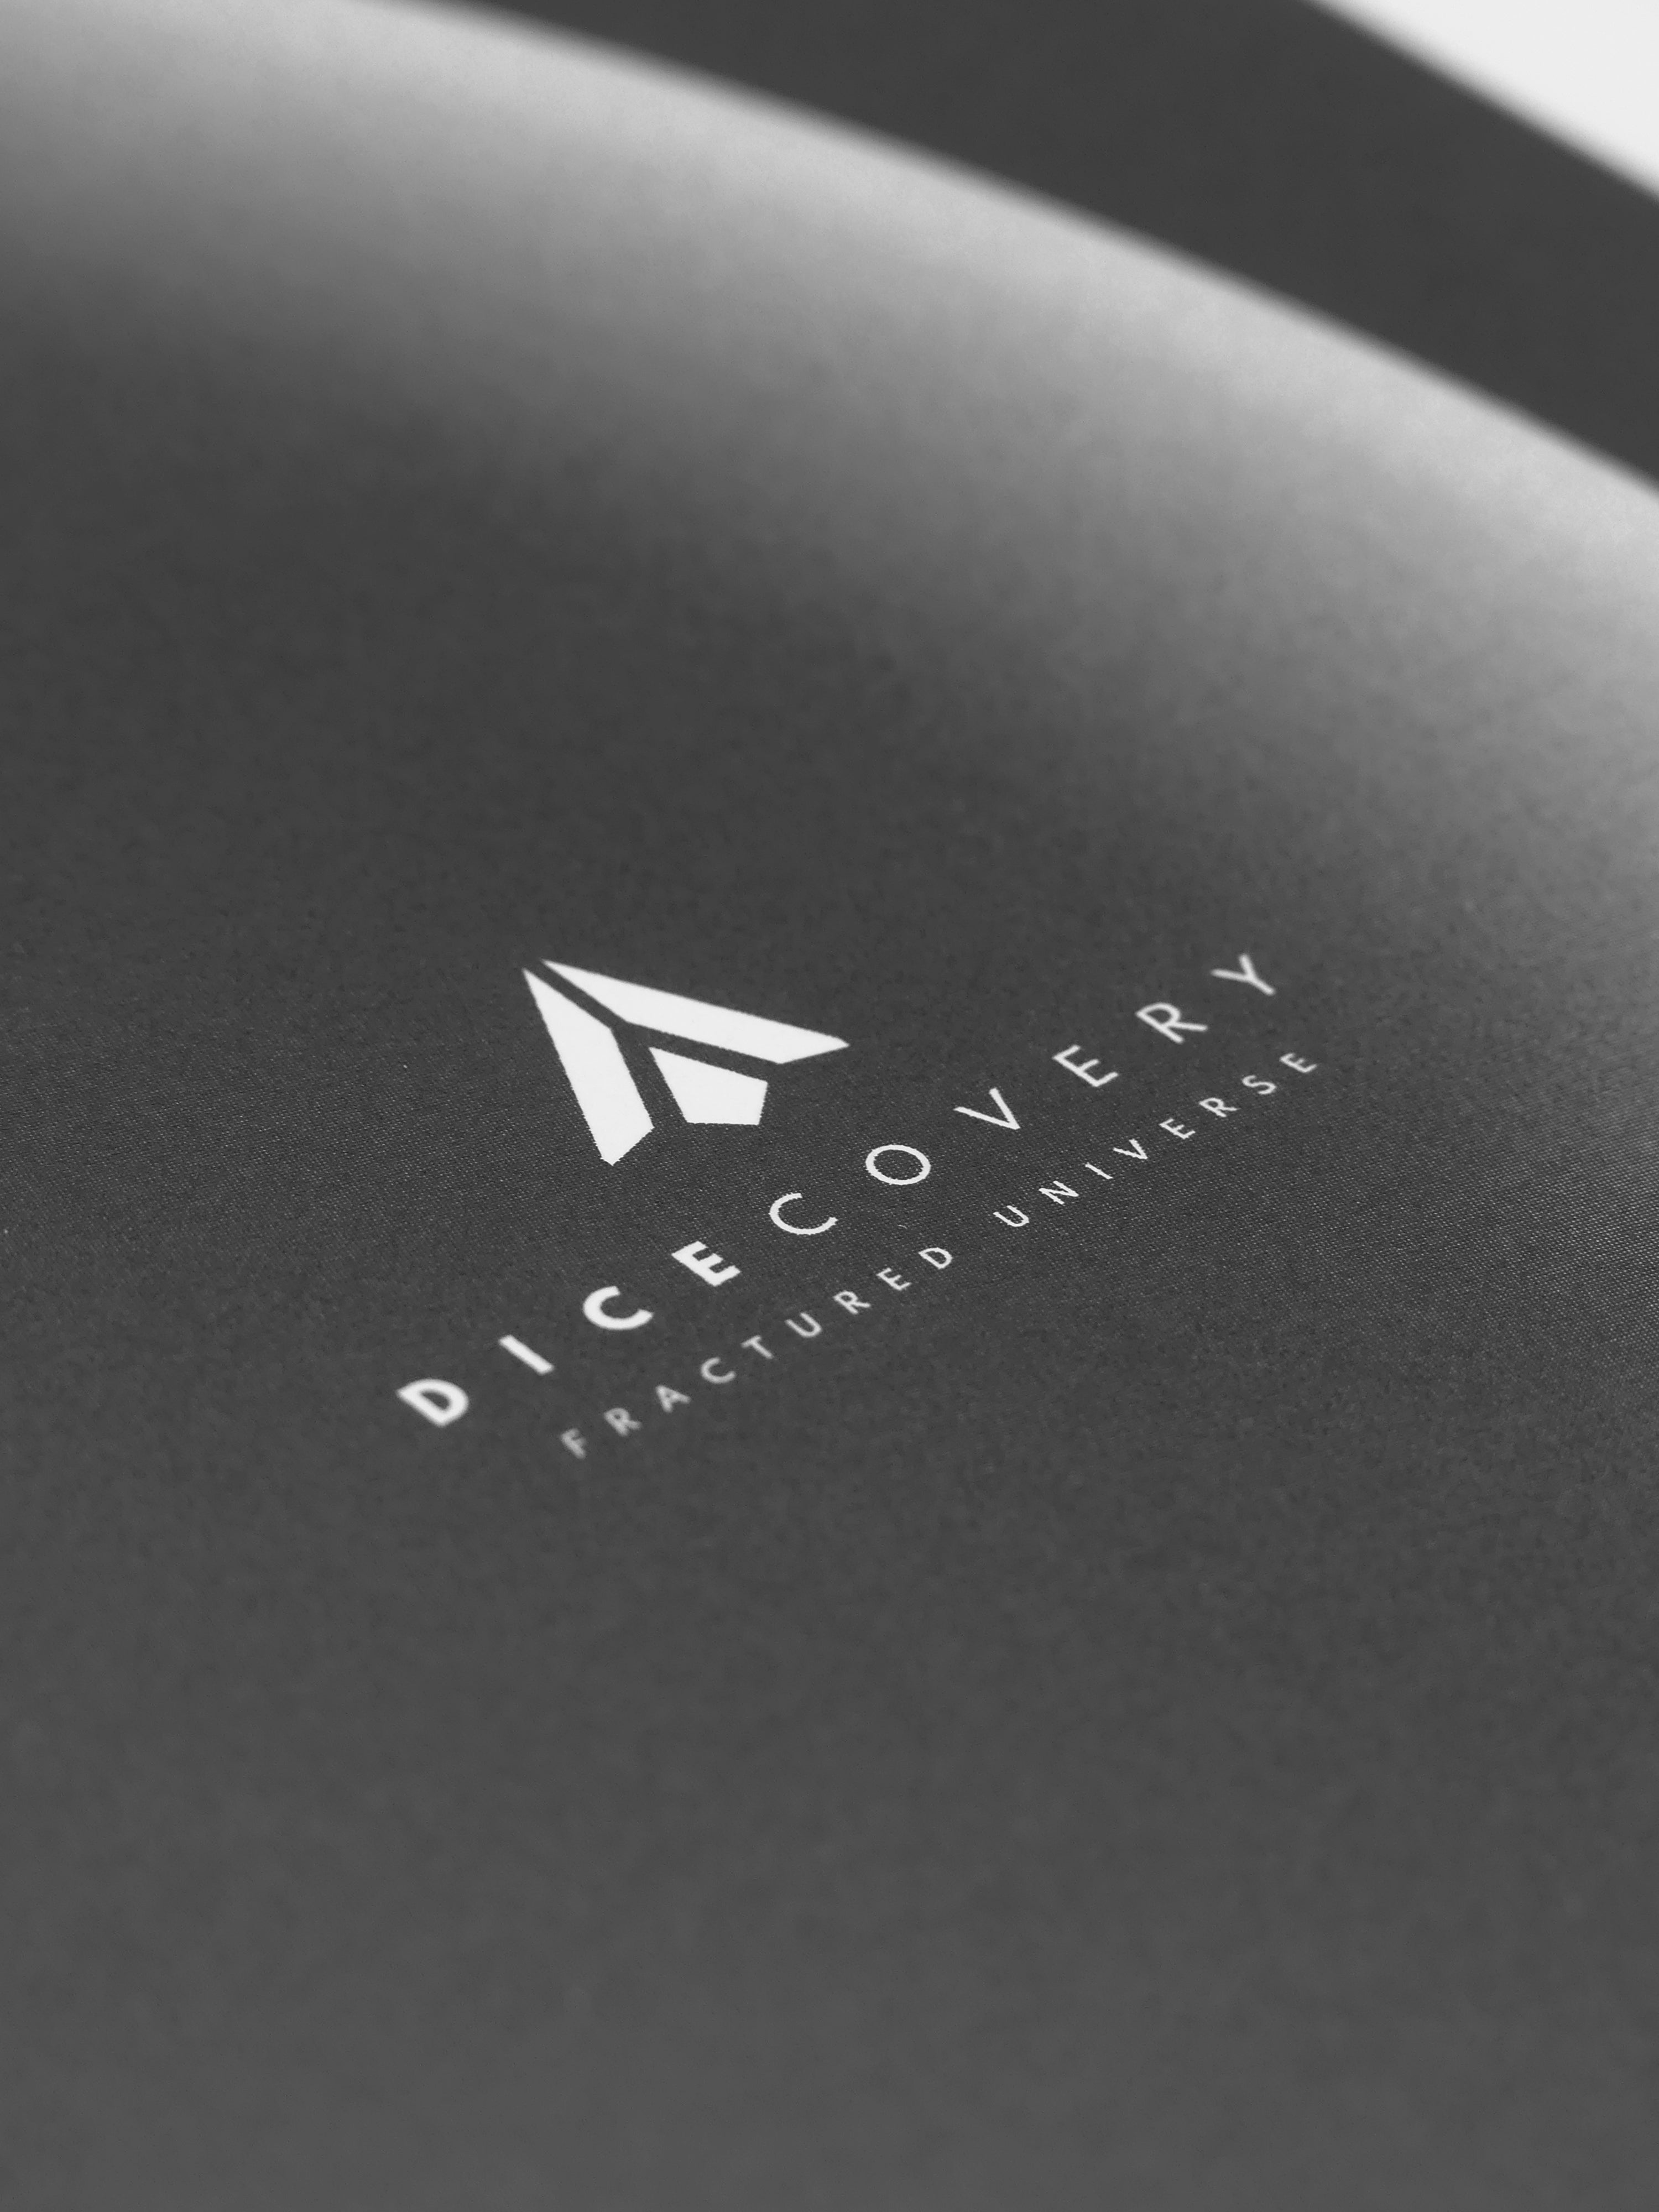 DICECOVERY NOTEBOOK